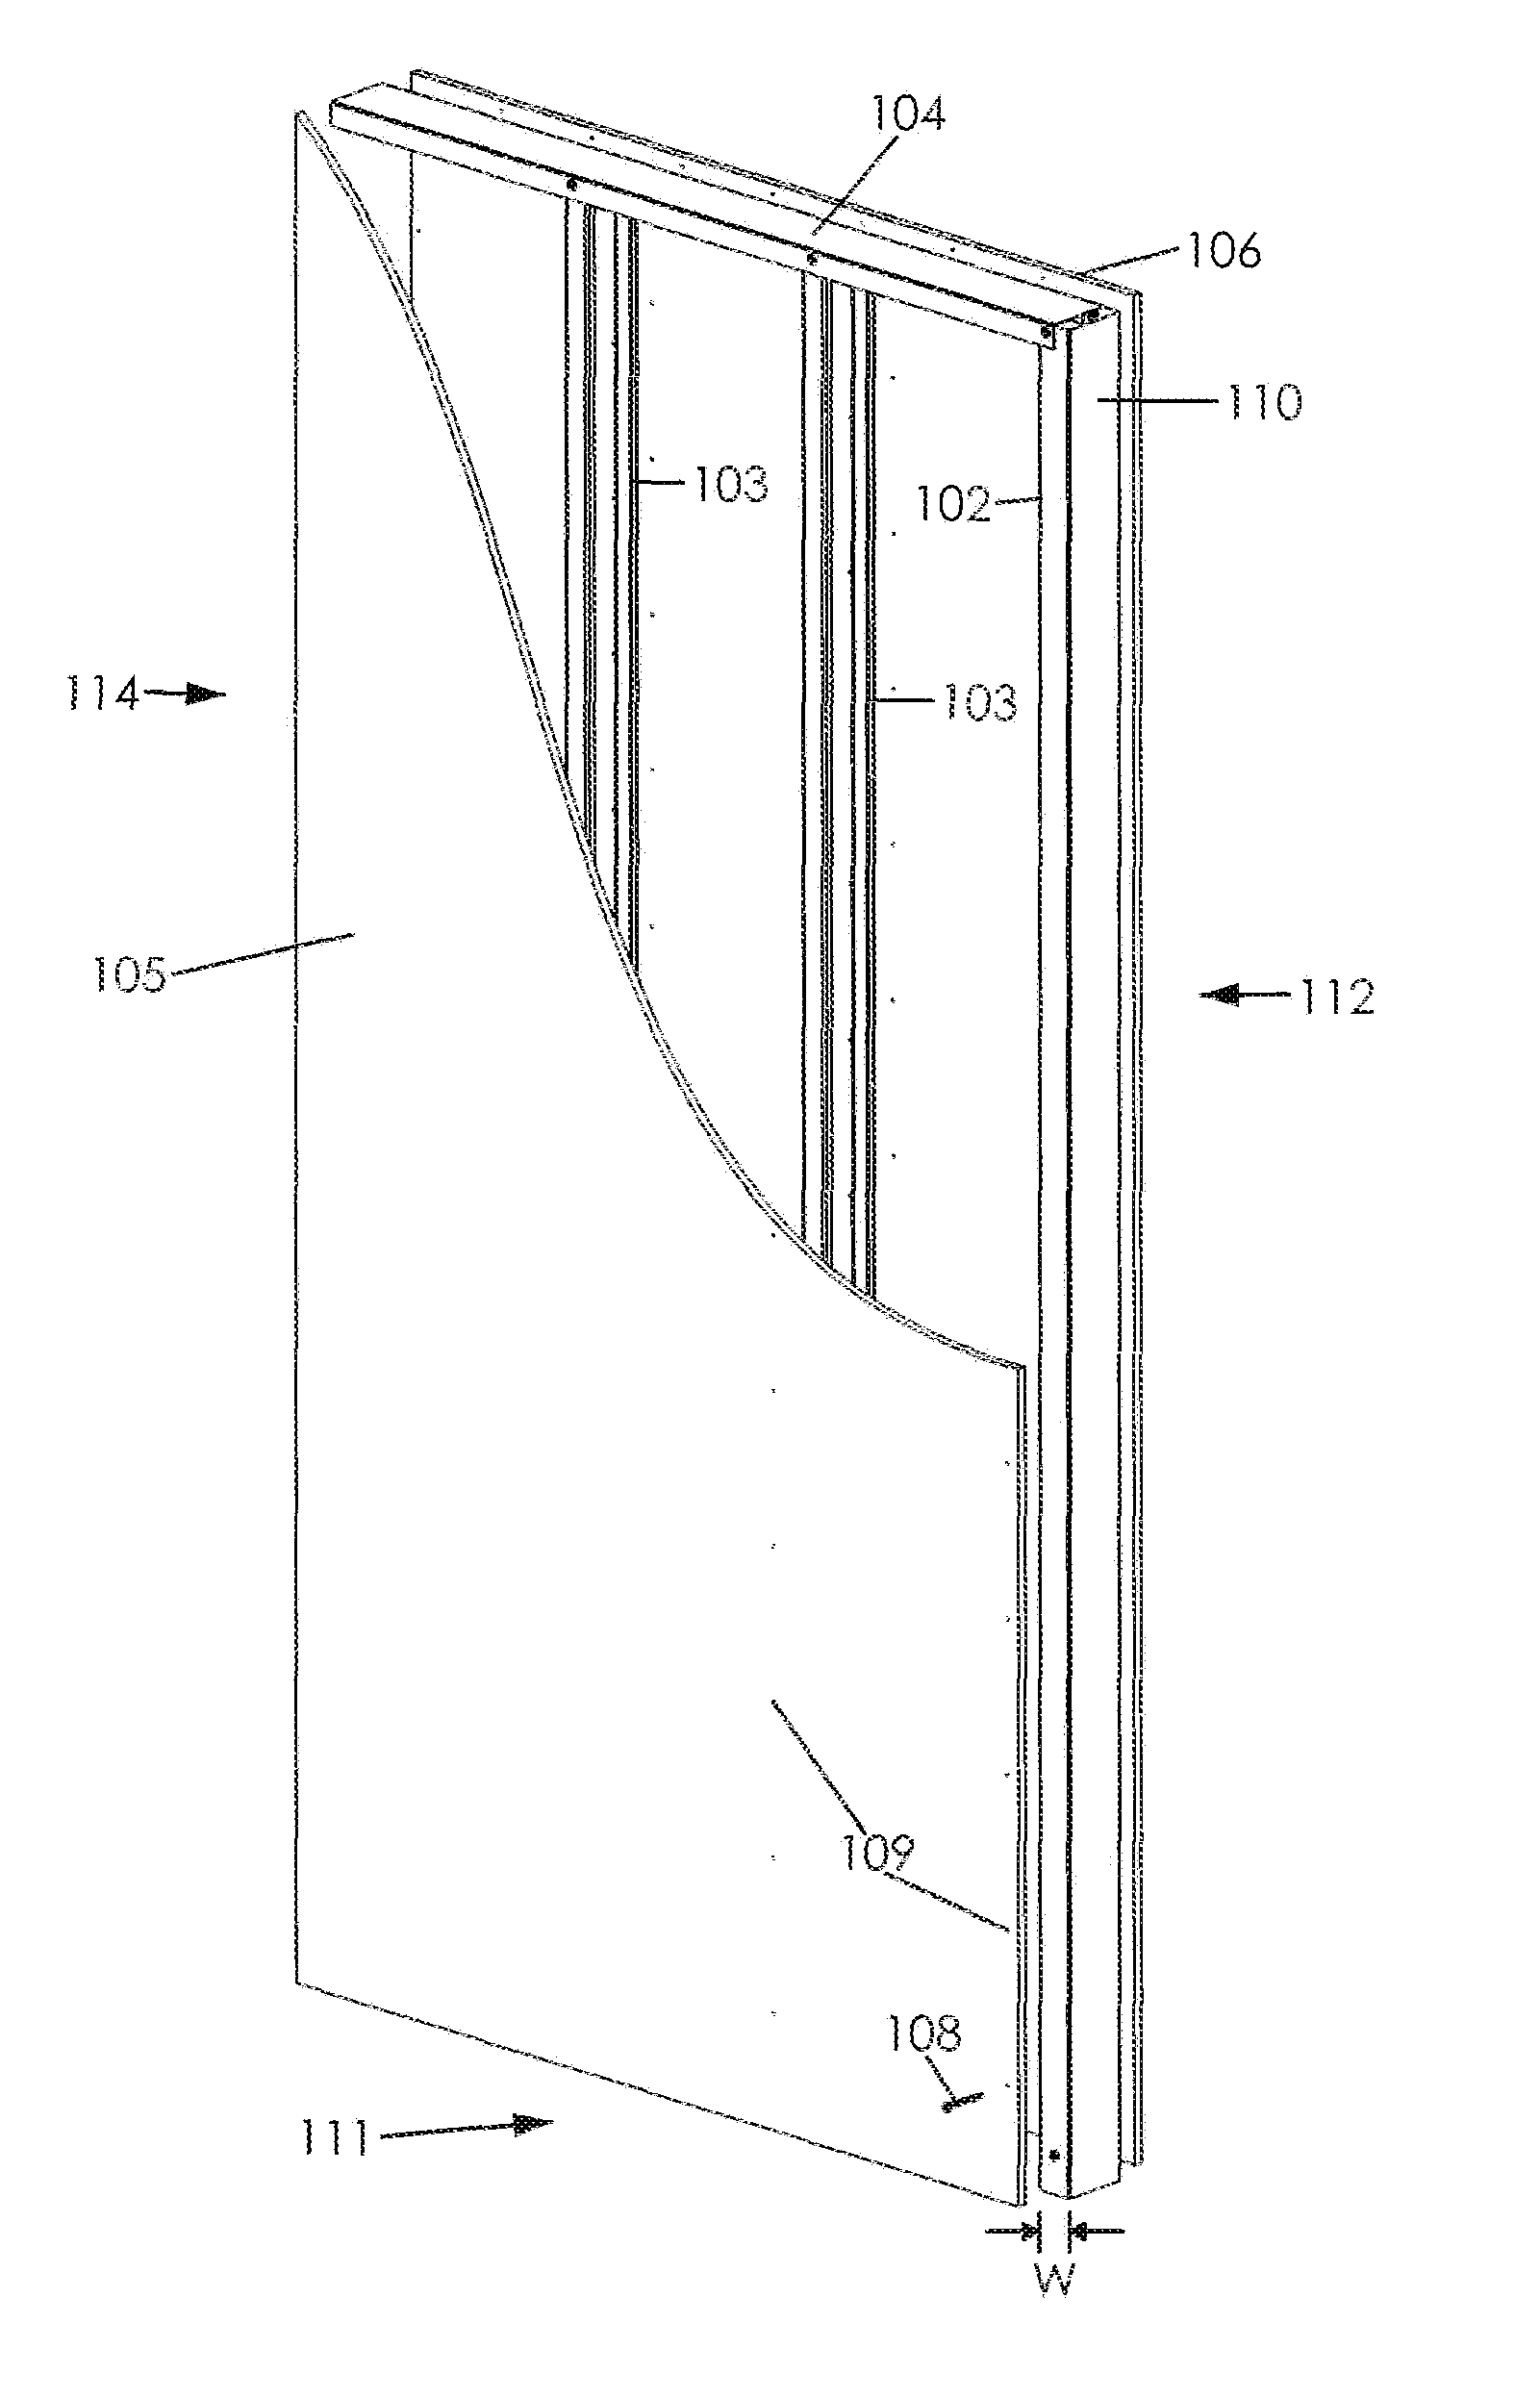 Structural Wall Panels for Use in Light-Frame Construction and Methods of Construction Employing Structural Wall Panels